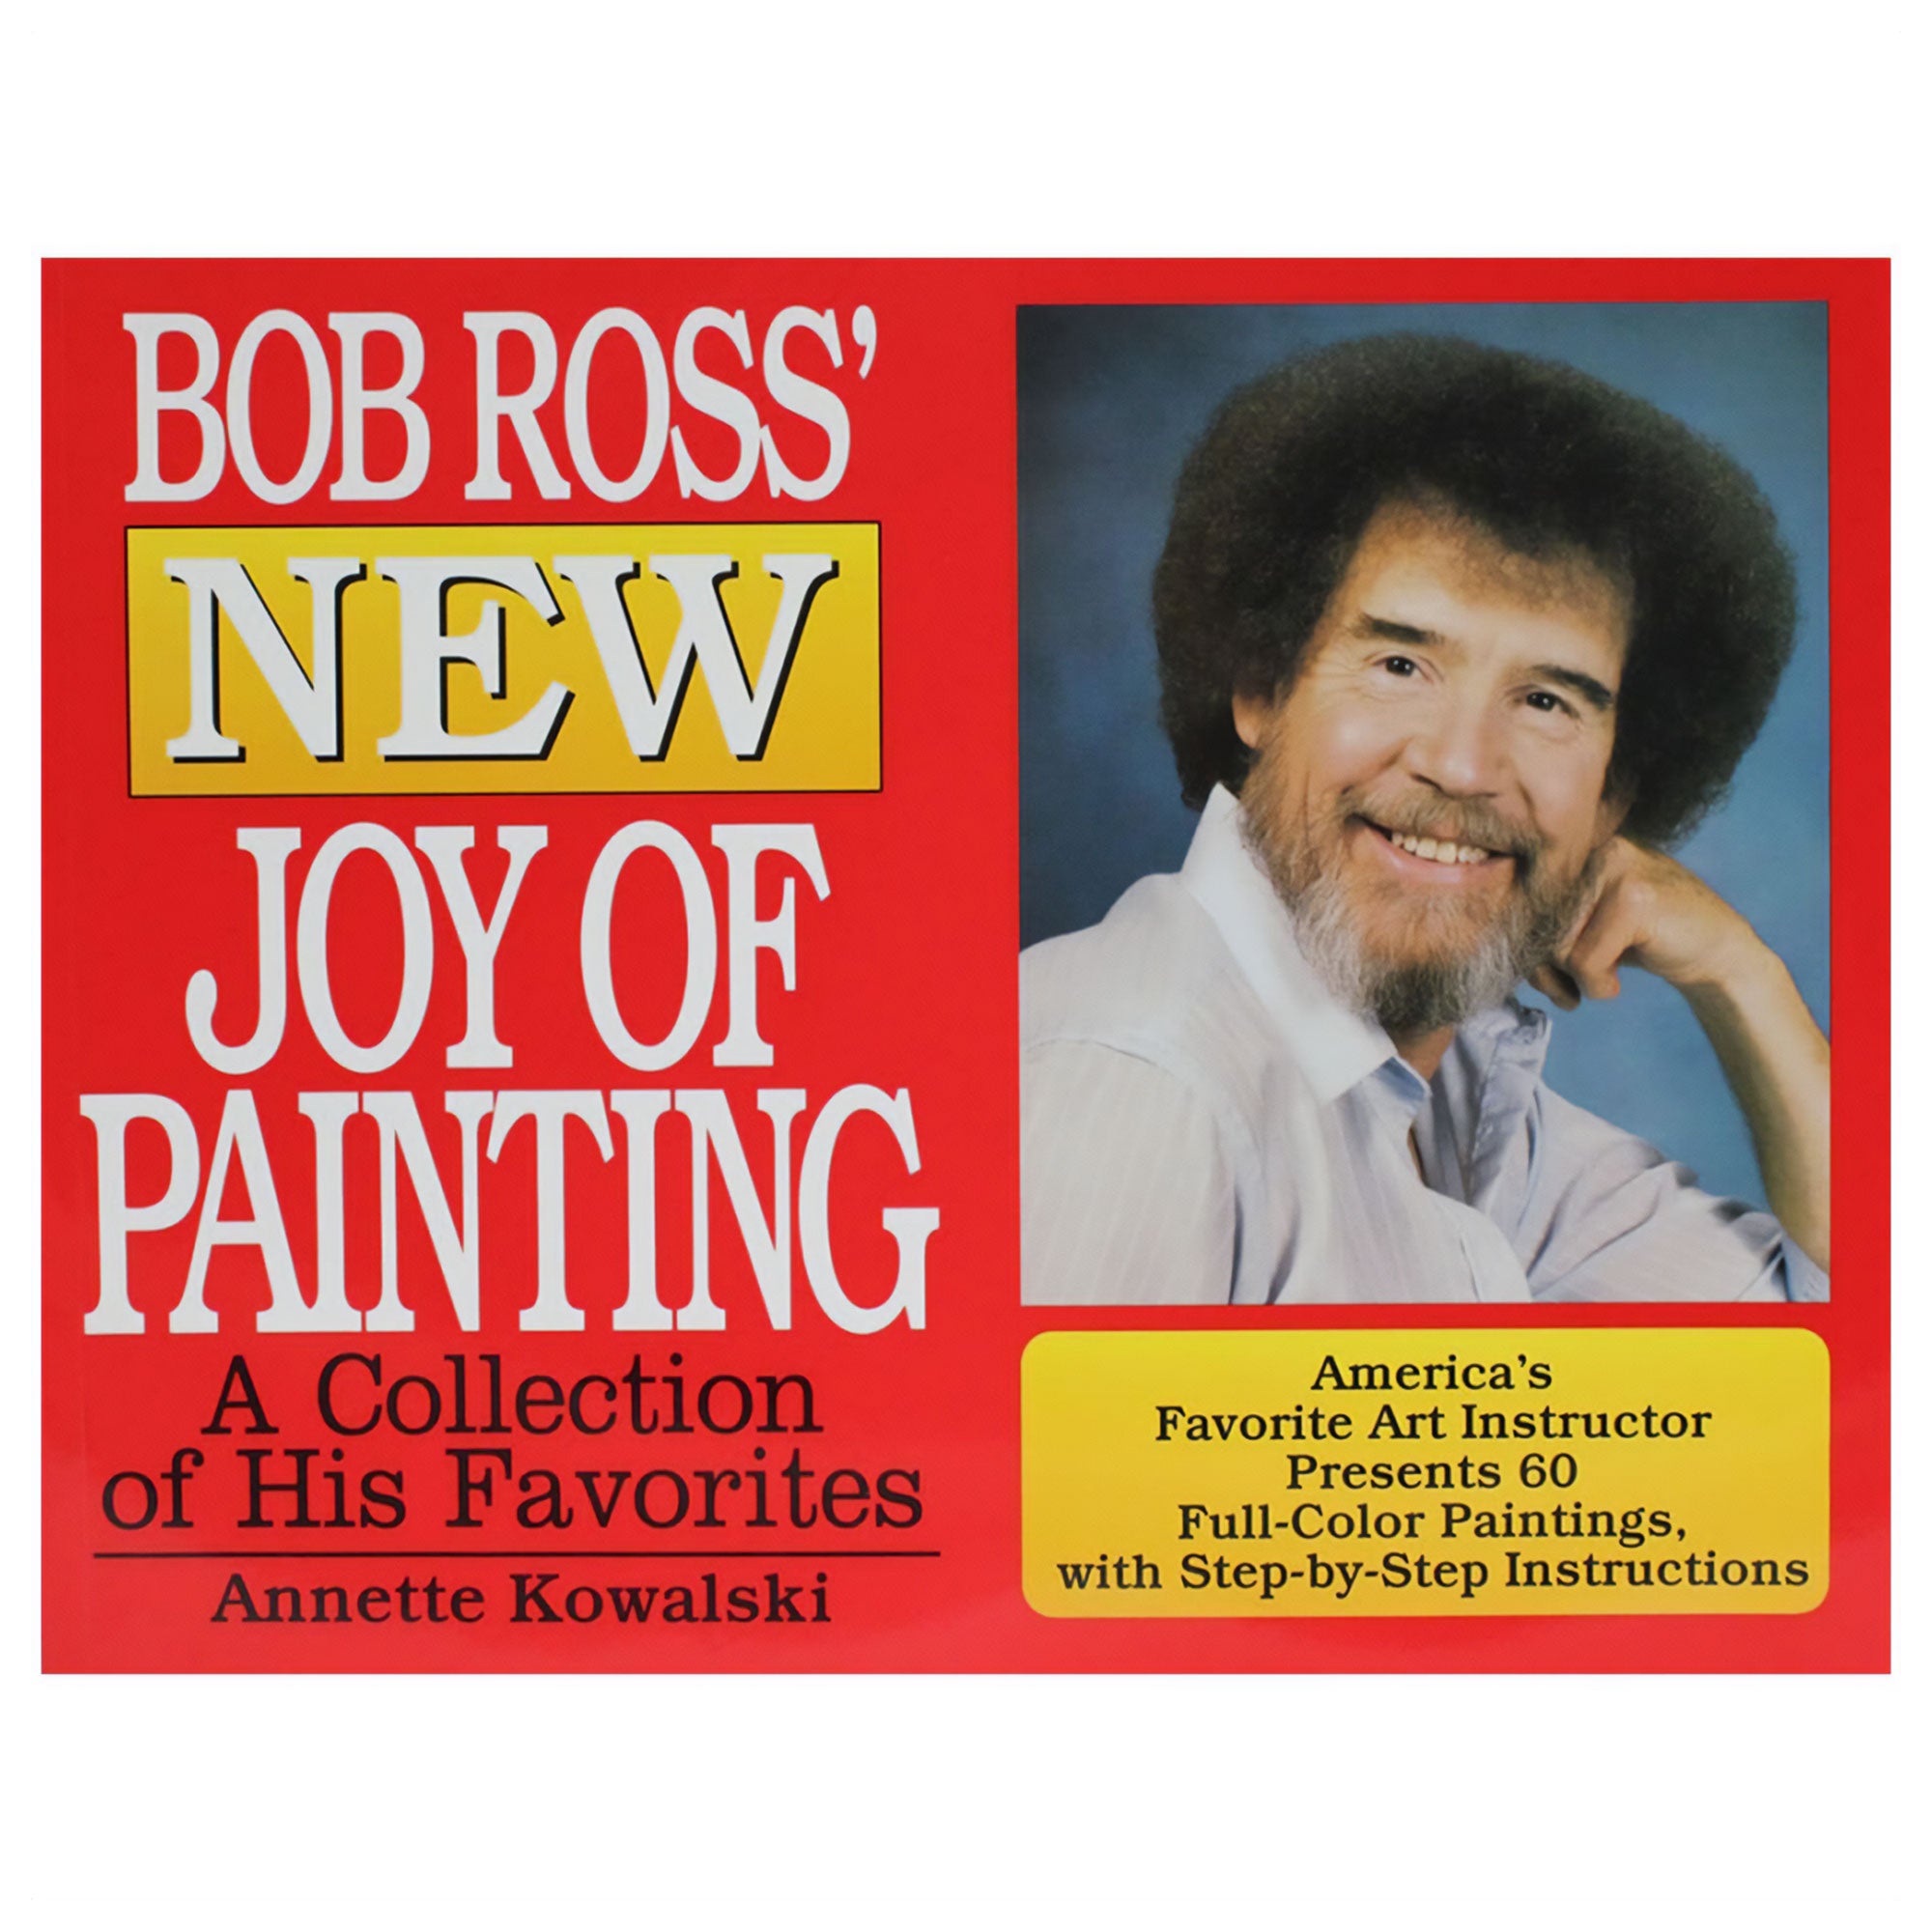 Bob Ross' NEW Joy of Painting - A Collection of his Favorites